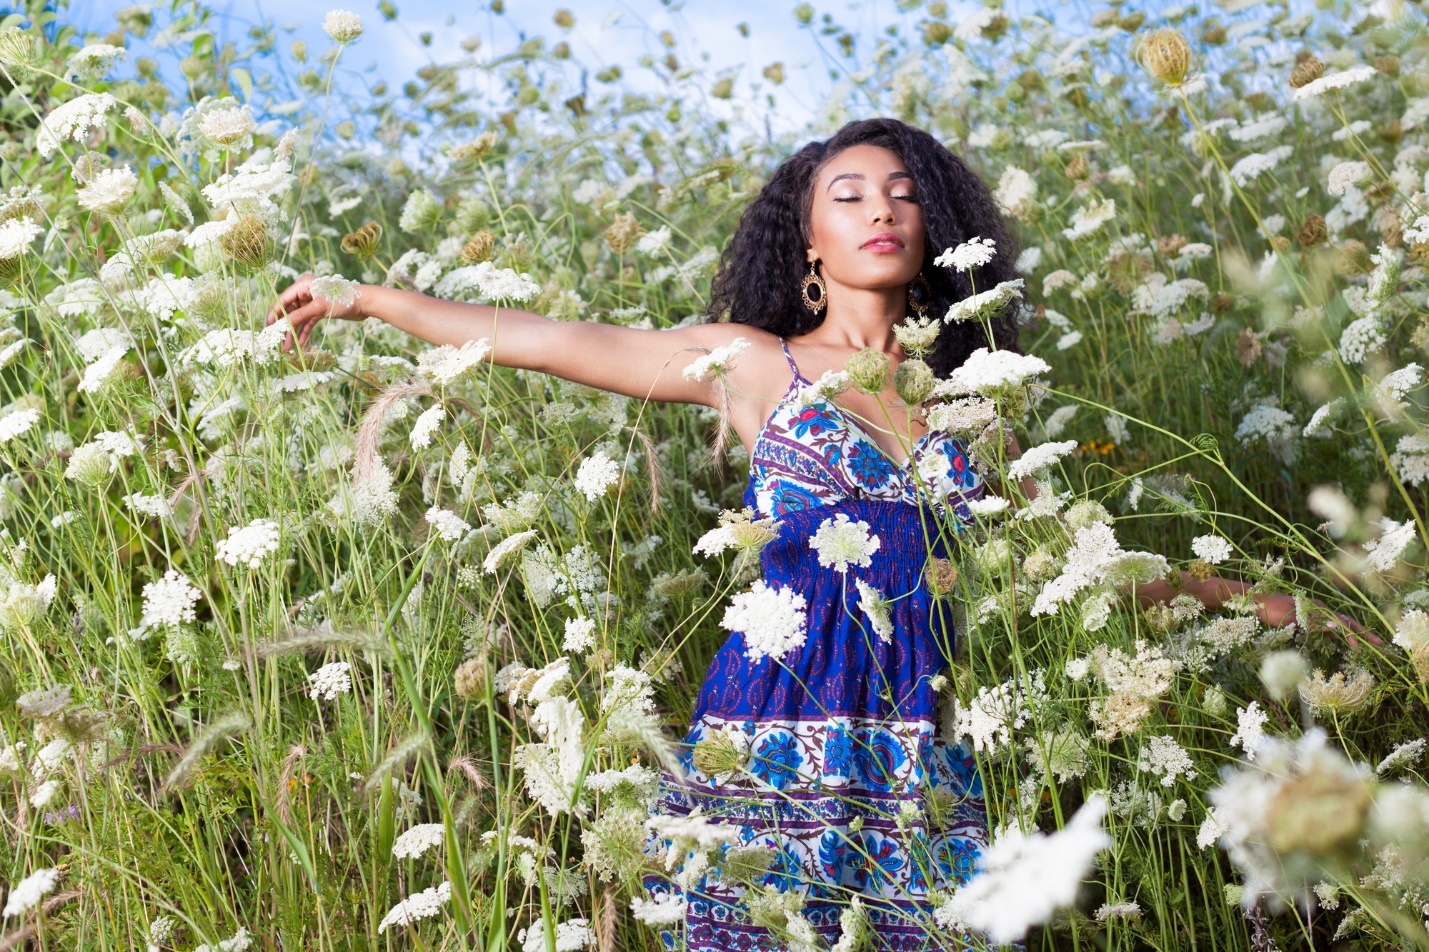 A person in a blue dress standing in a field of white flowers

Description automatically generated with medium confidence